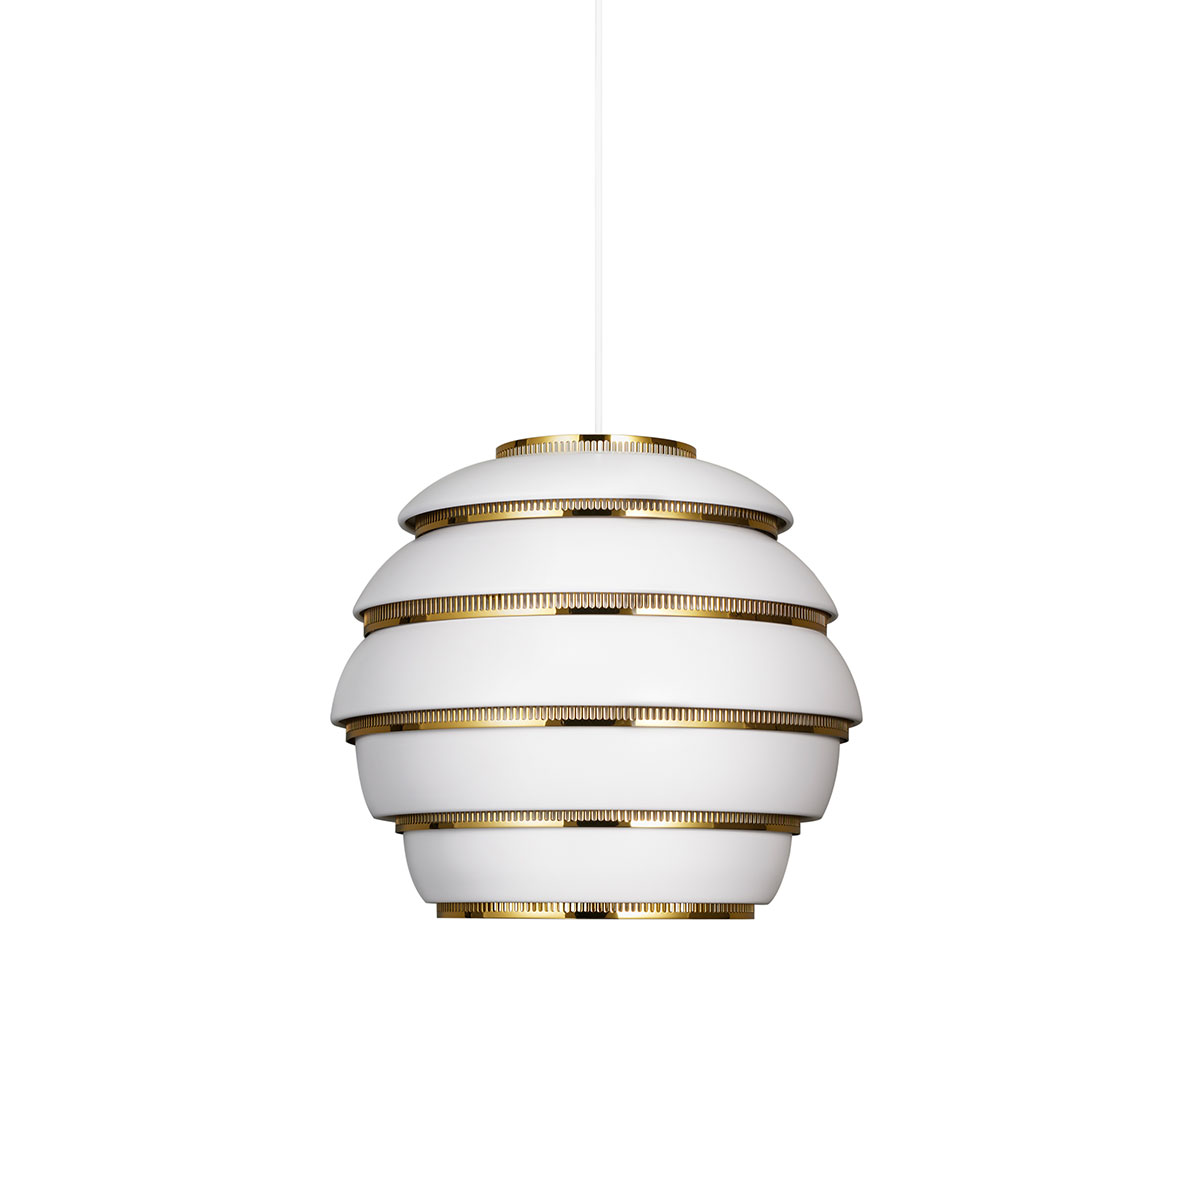 “Beehive“ A331 Taklampe